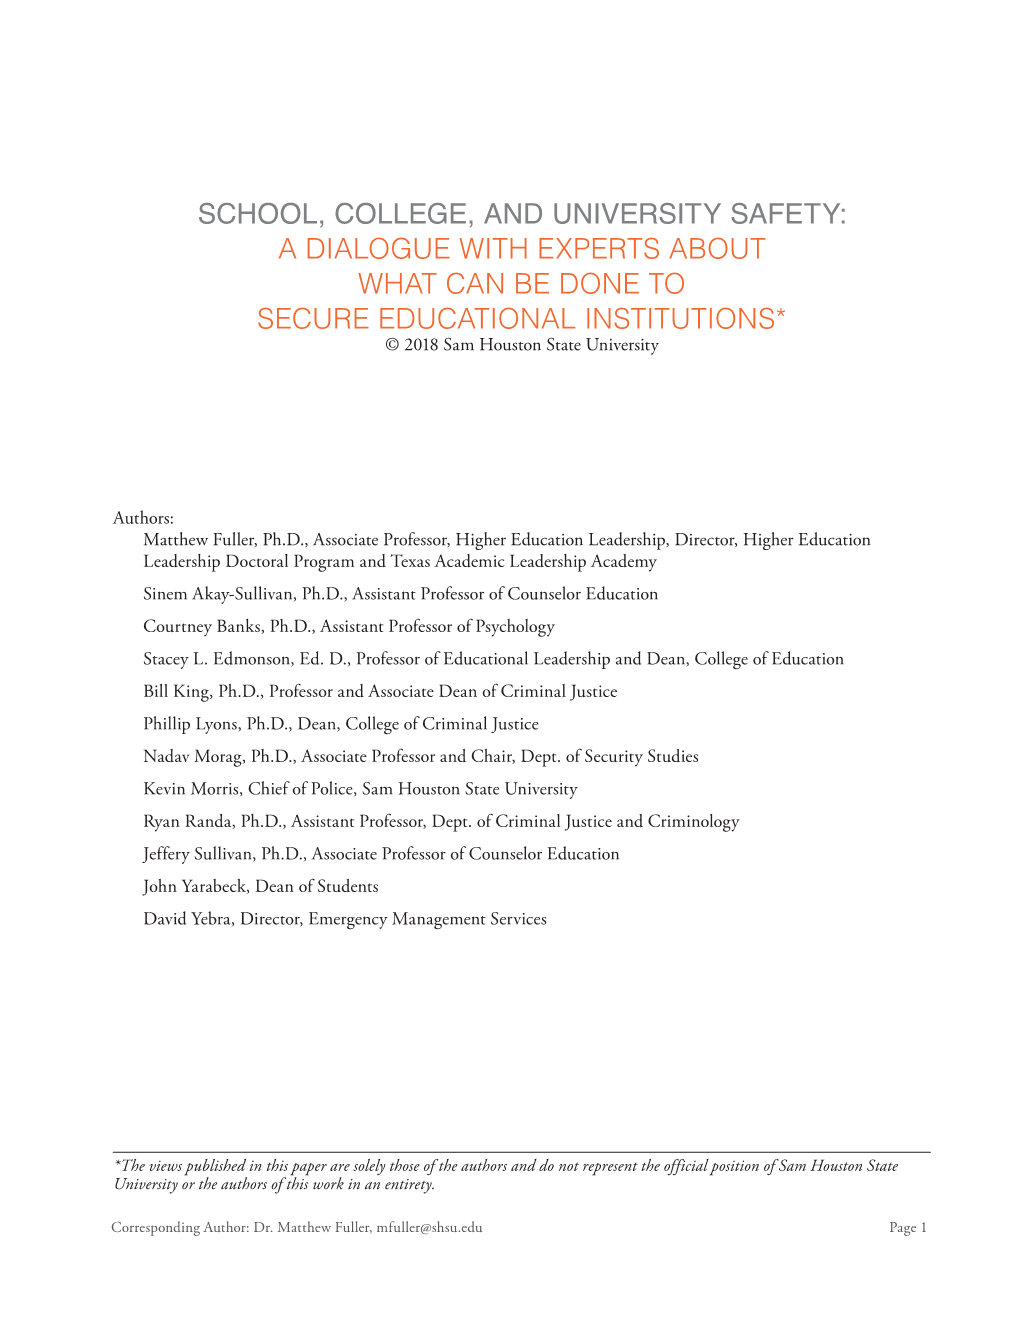 SCHOOL, COLLEGE, and UNIVERSITY SAFETY: a DIALOGUE with EXPERTS ABOUT WHAT CAN BE DONE to SECURE EDUCATIONAL INSTITUTIONS* © 2018 Sam Houston State University